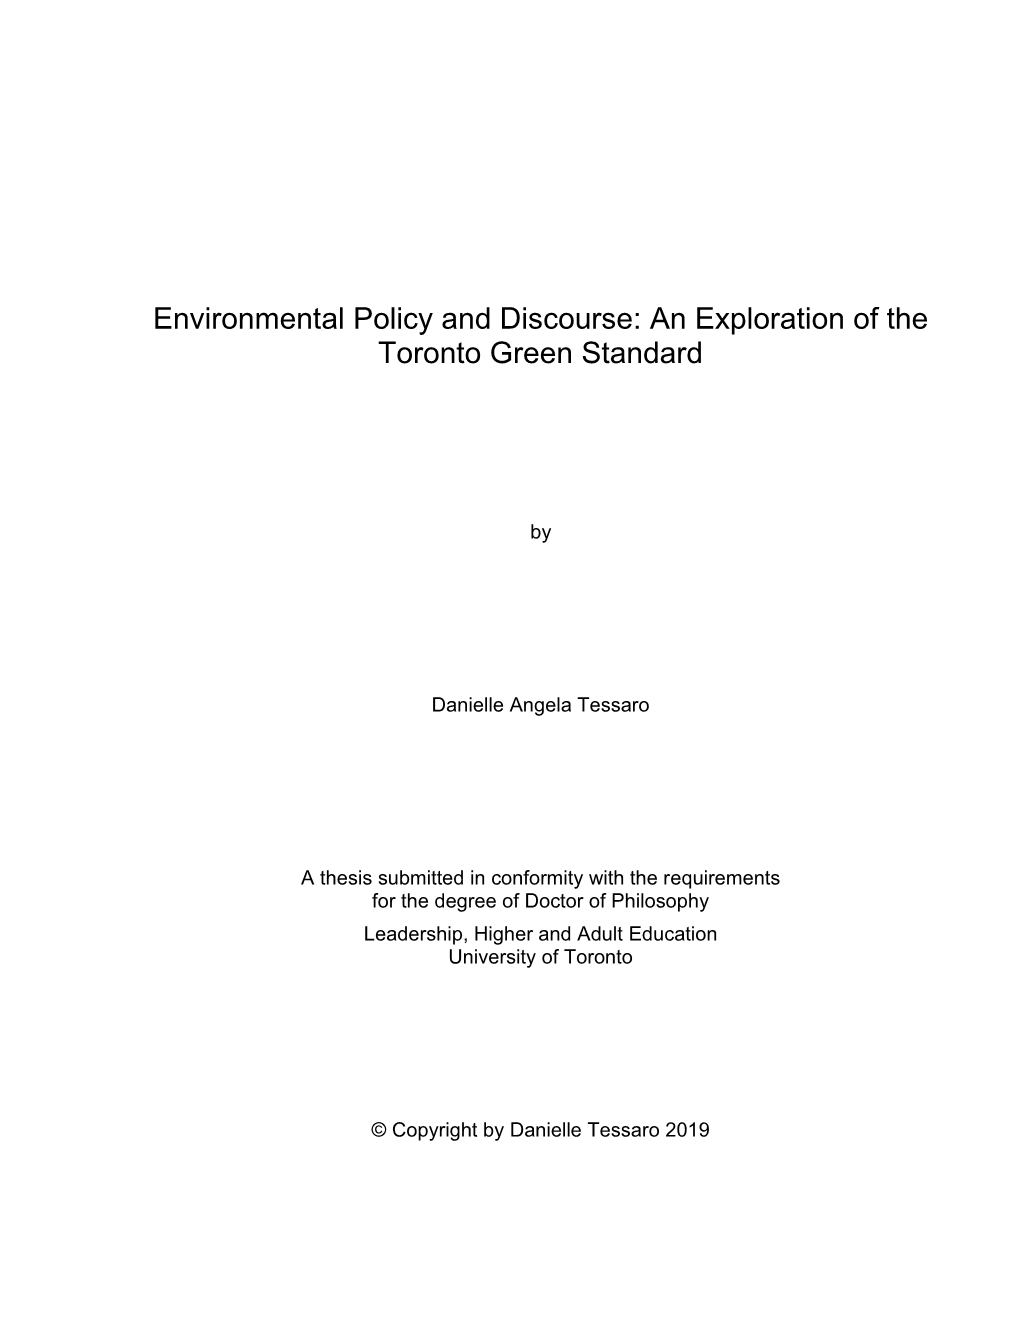 Environmental Policy and Discourse: an Exploration of the Toronto Green Standard